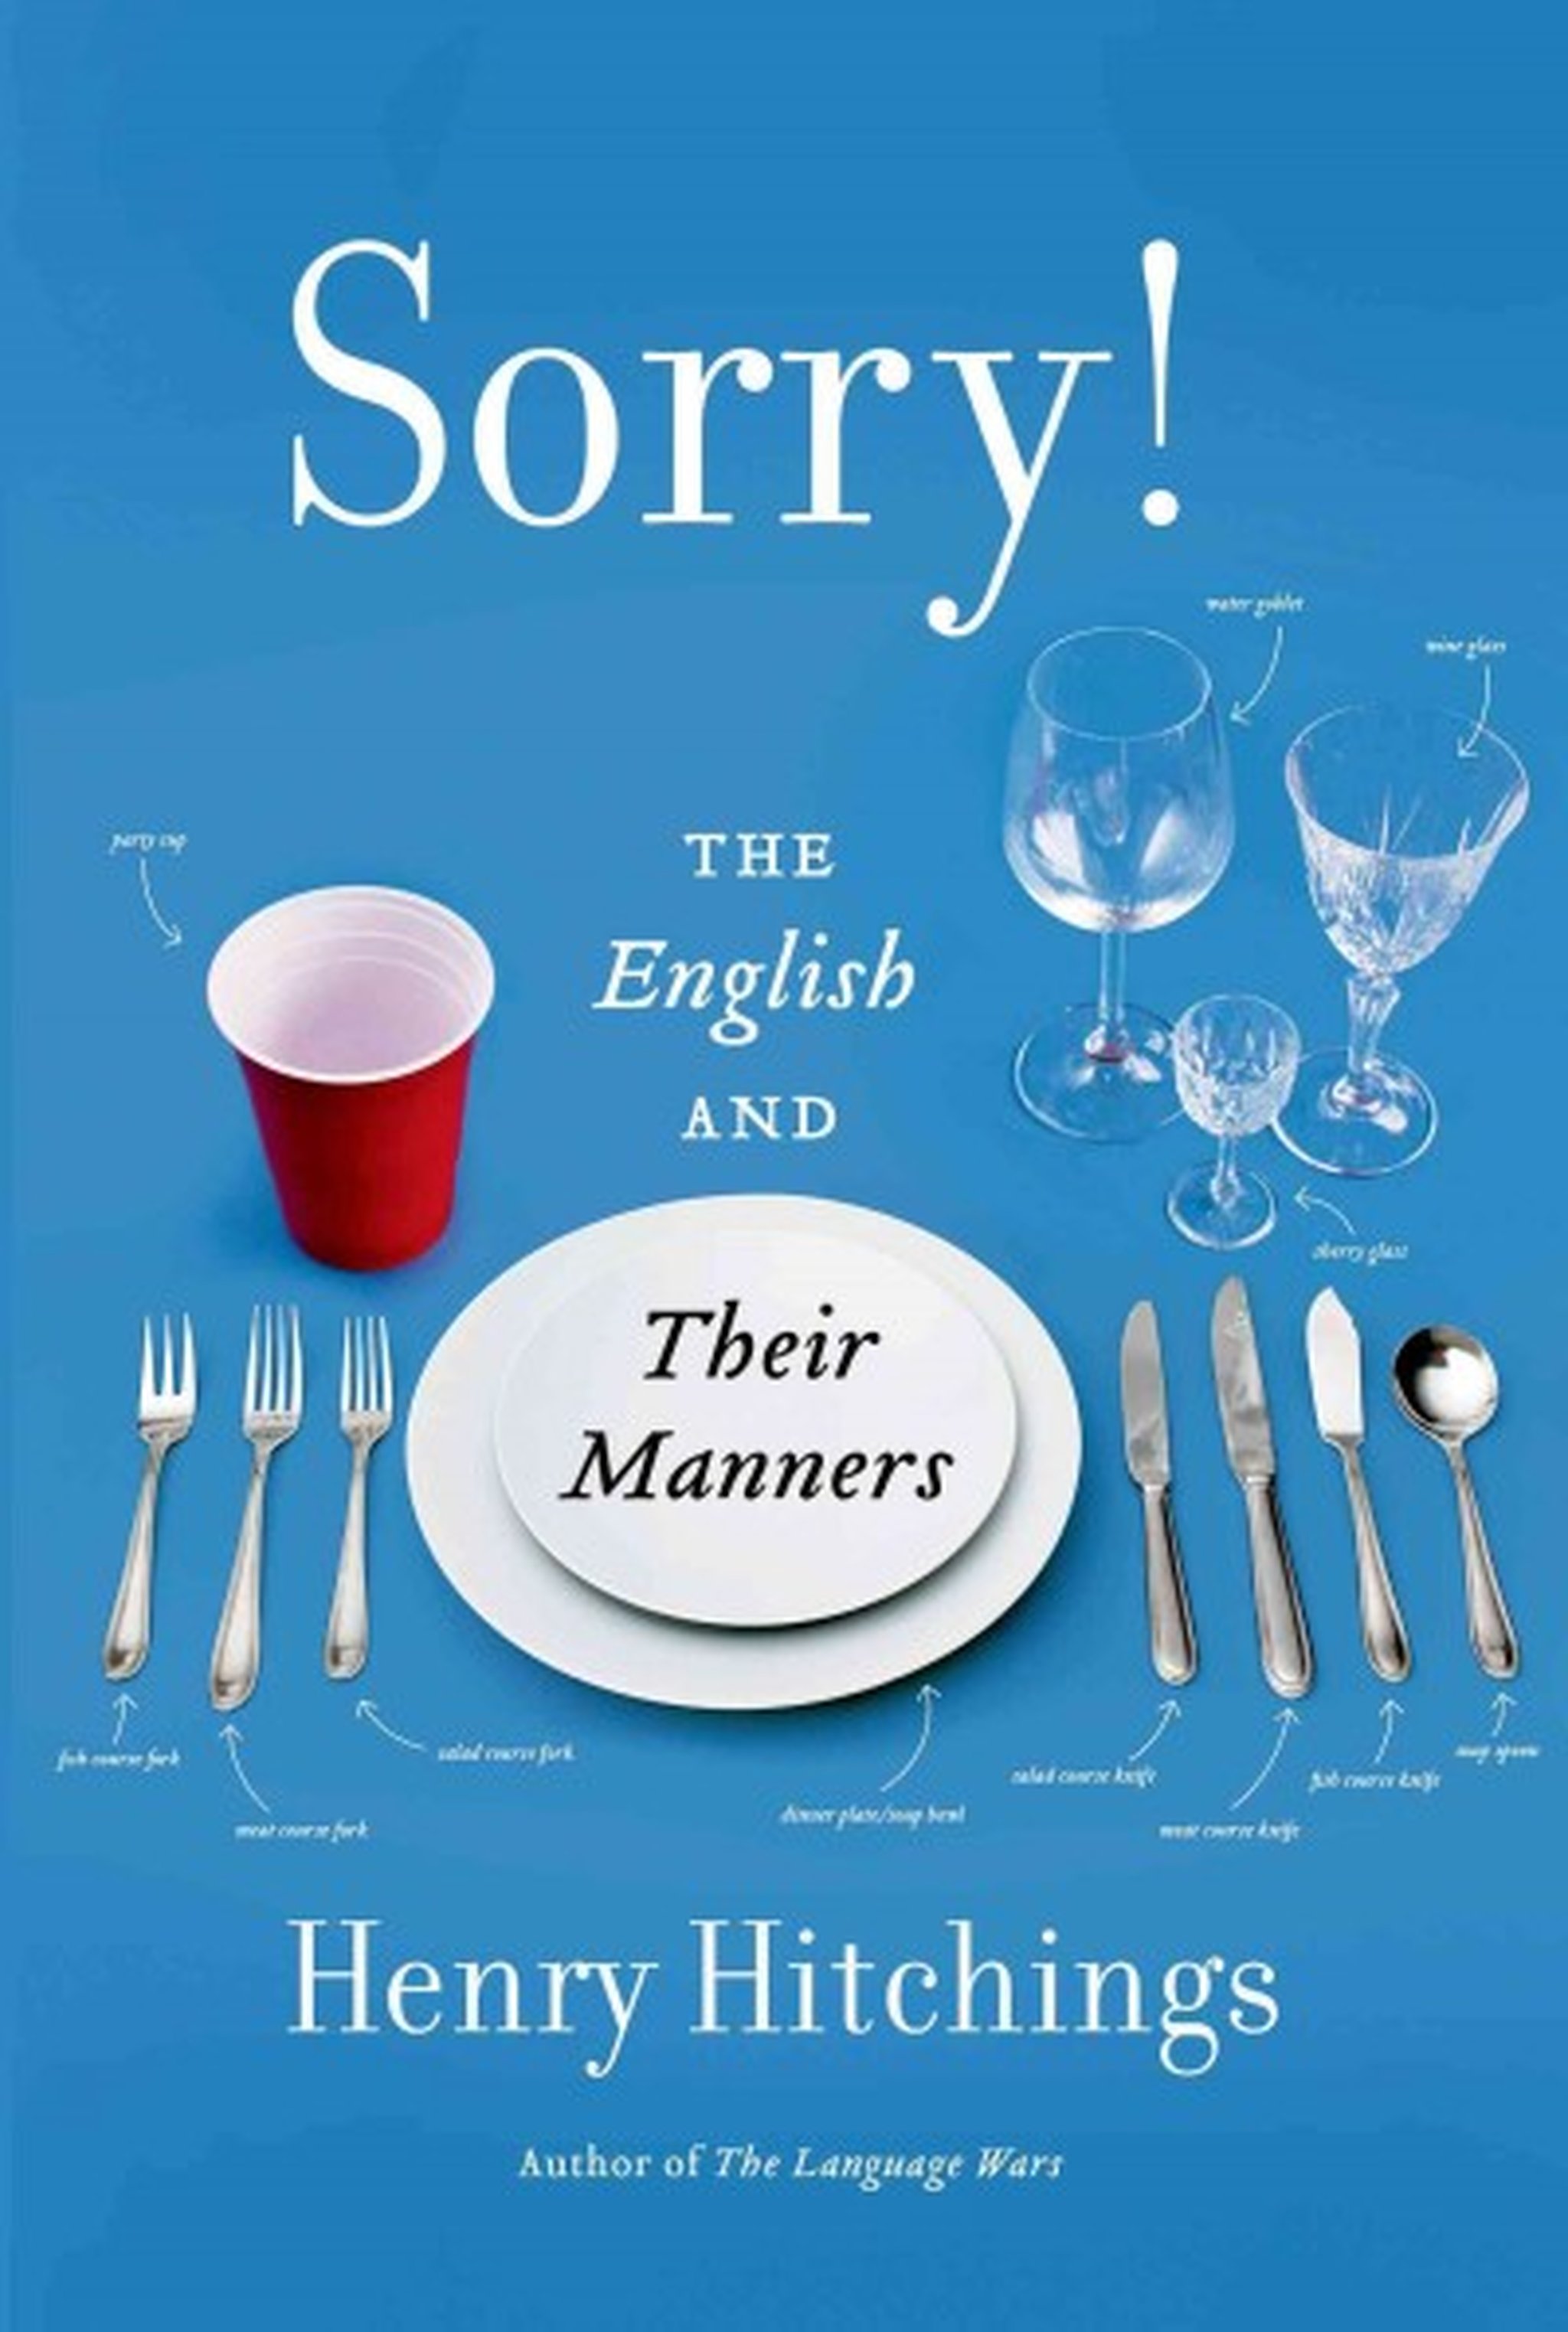 Sorry! The English and Their Manners, Henry Hitchings